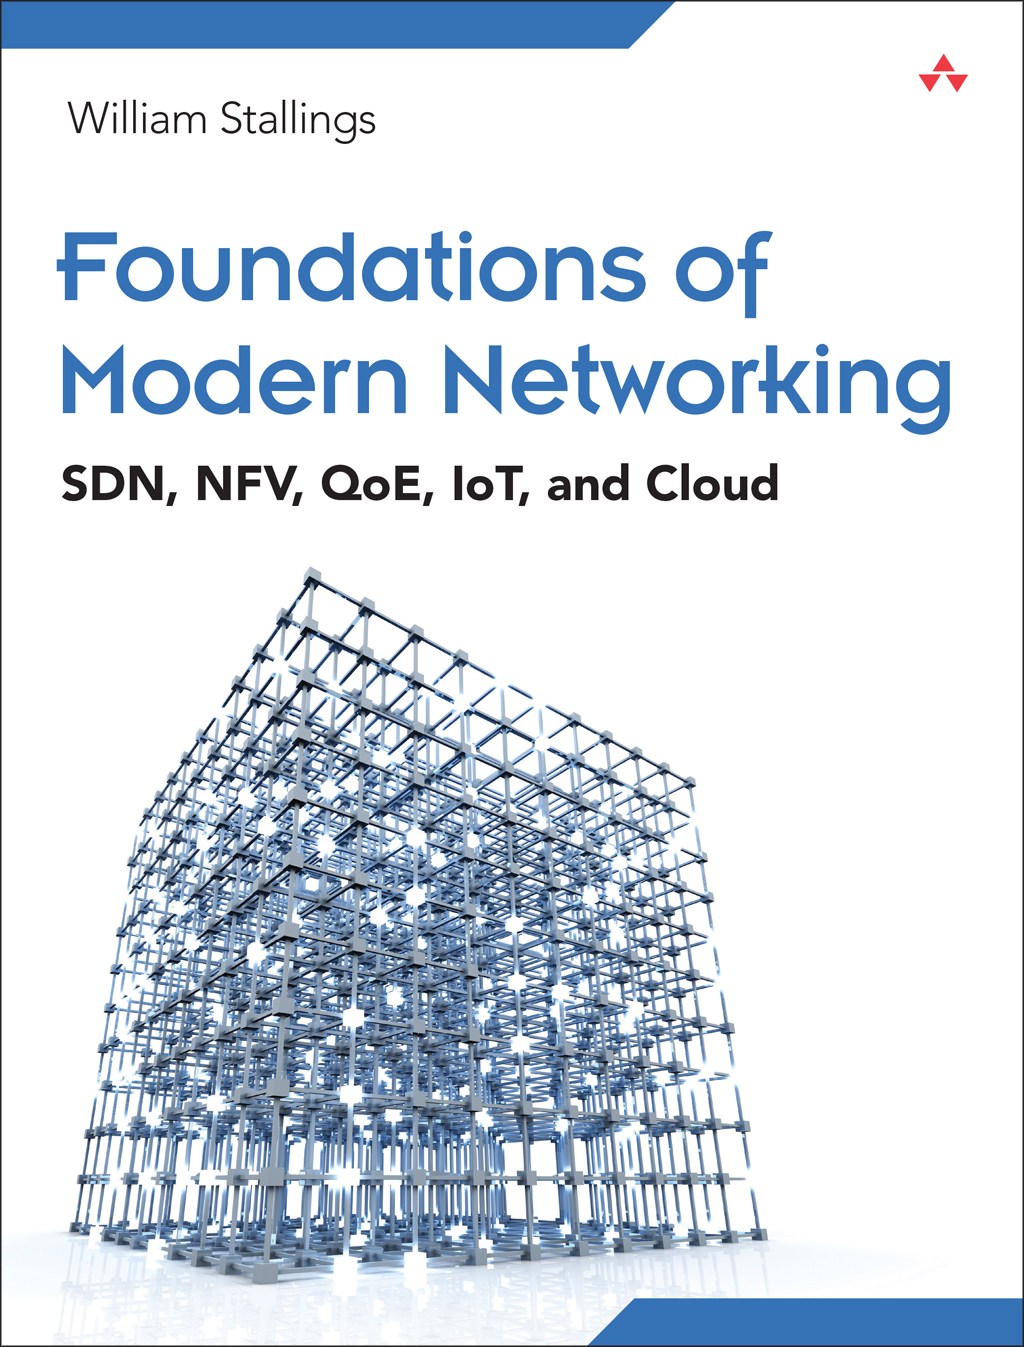 foundations-of-modern-networking-sdn-nfv-qoe-iot-and-cloud-informit